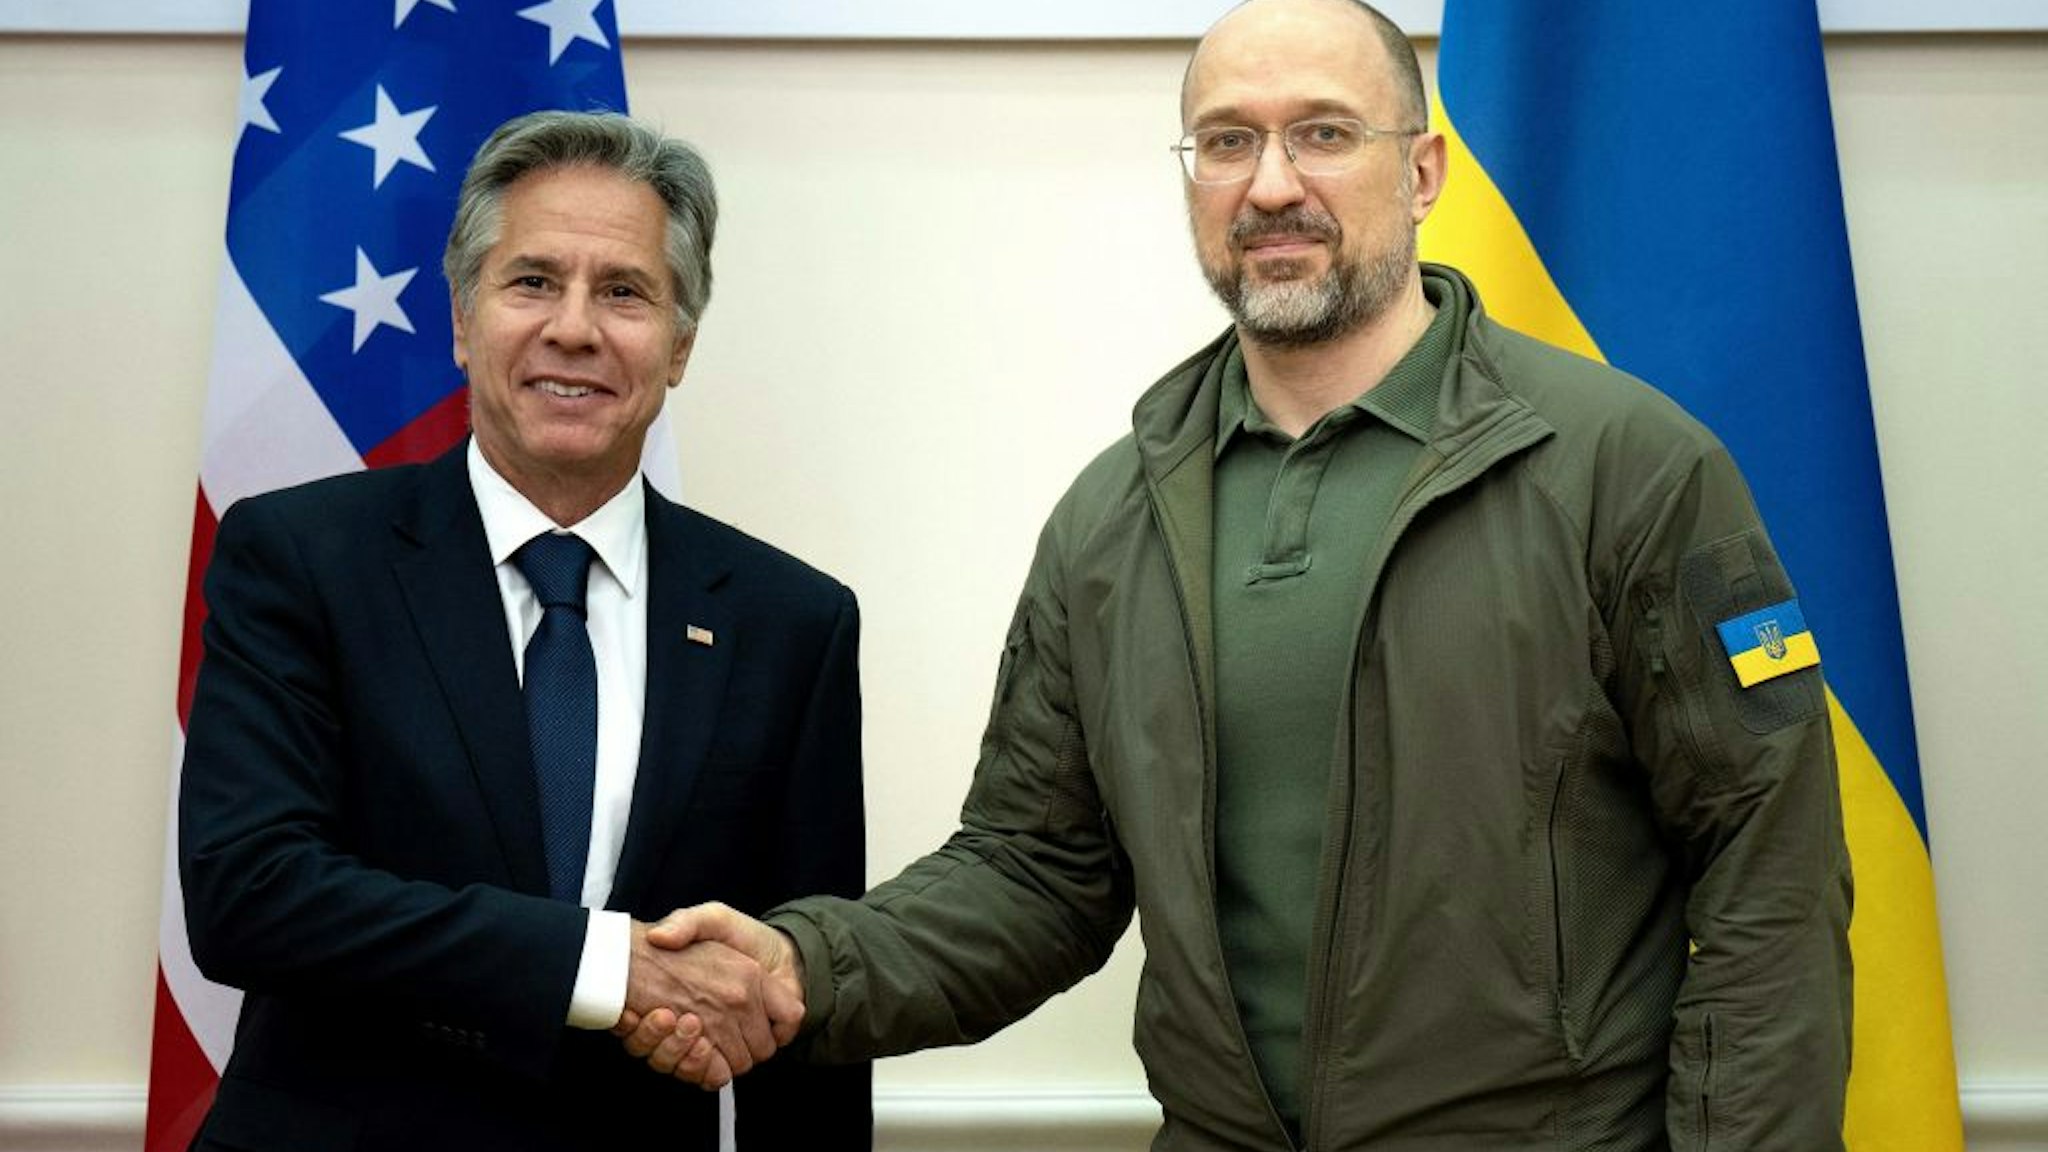 US Secretary of State Antony Blinken and Ukraine's Prime Minister Denys Shmyhal shake hands prior to their meeting at the Prime Minister's Office in Kyiv on September 6, 2023. US Secretary of State Antony Blinken arrived in Kyiv on an unannounced visit on September 6, 2023, where he was due to announce more than a billion dollars in fresh aid to Ukraine. Blinken's visit -- his fourth during Moscow's assault -- comes as Kyiv has touted some successes this week in its offensive to push back Russian forces. (Photo by Brendan Smialowski / POOL / AFP)